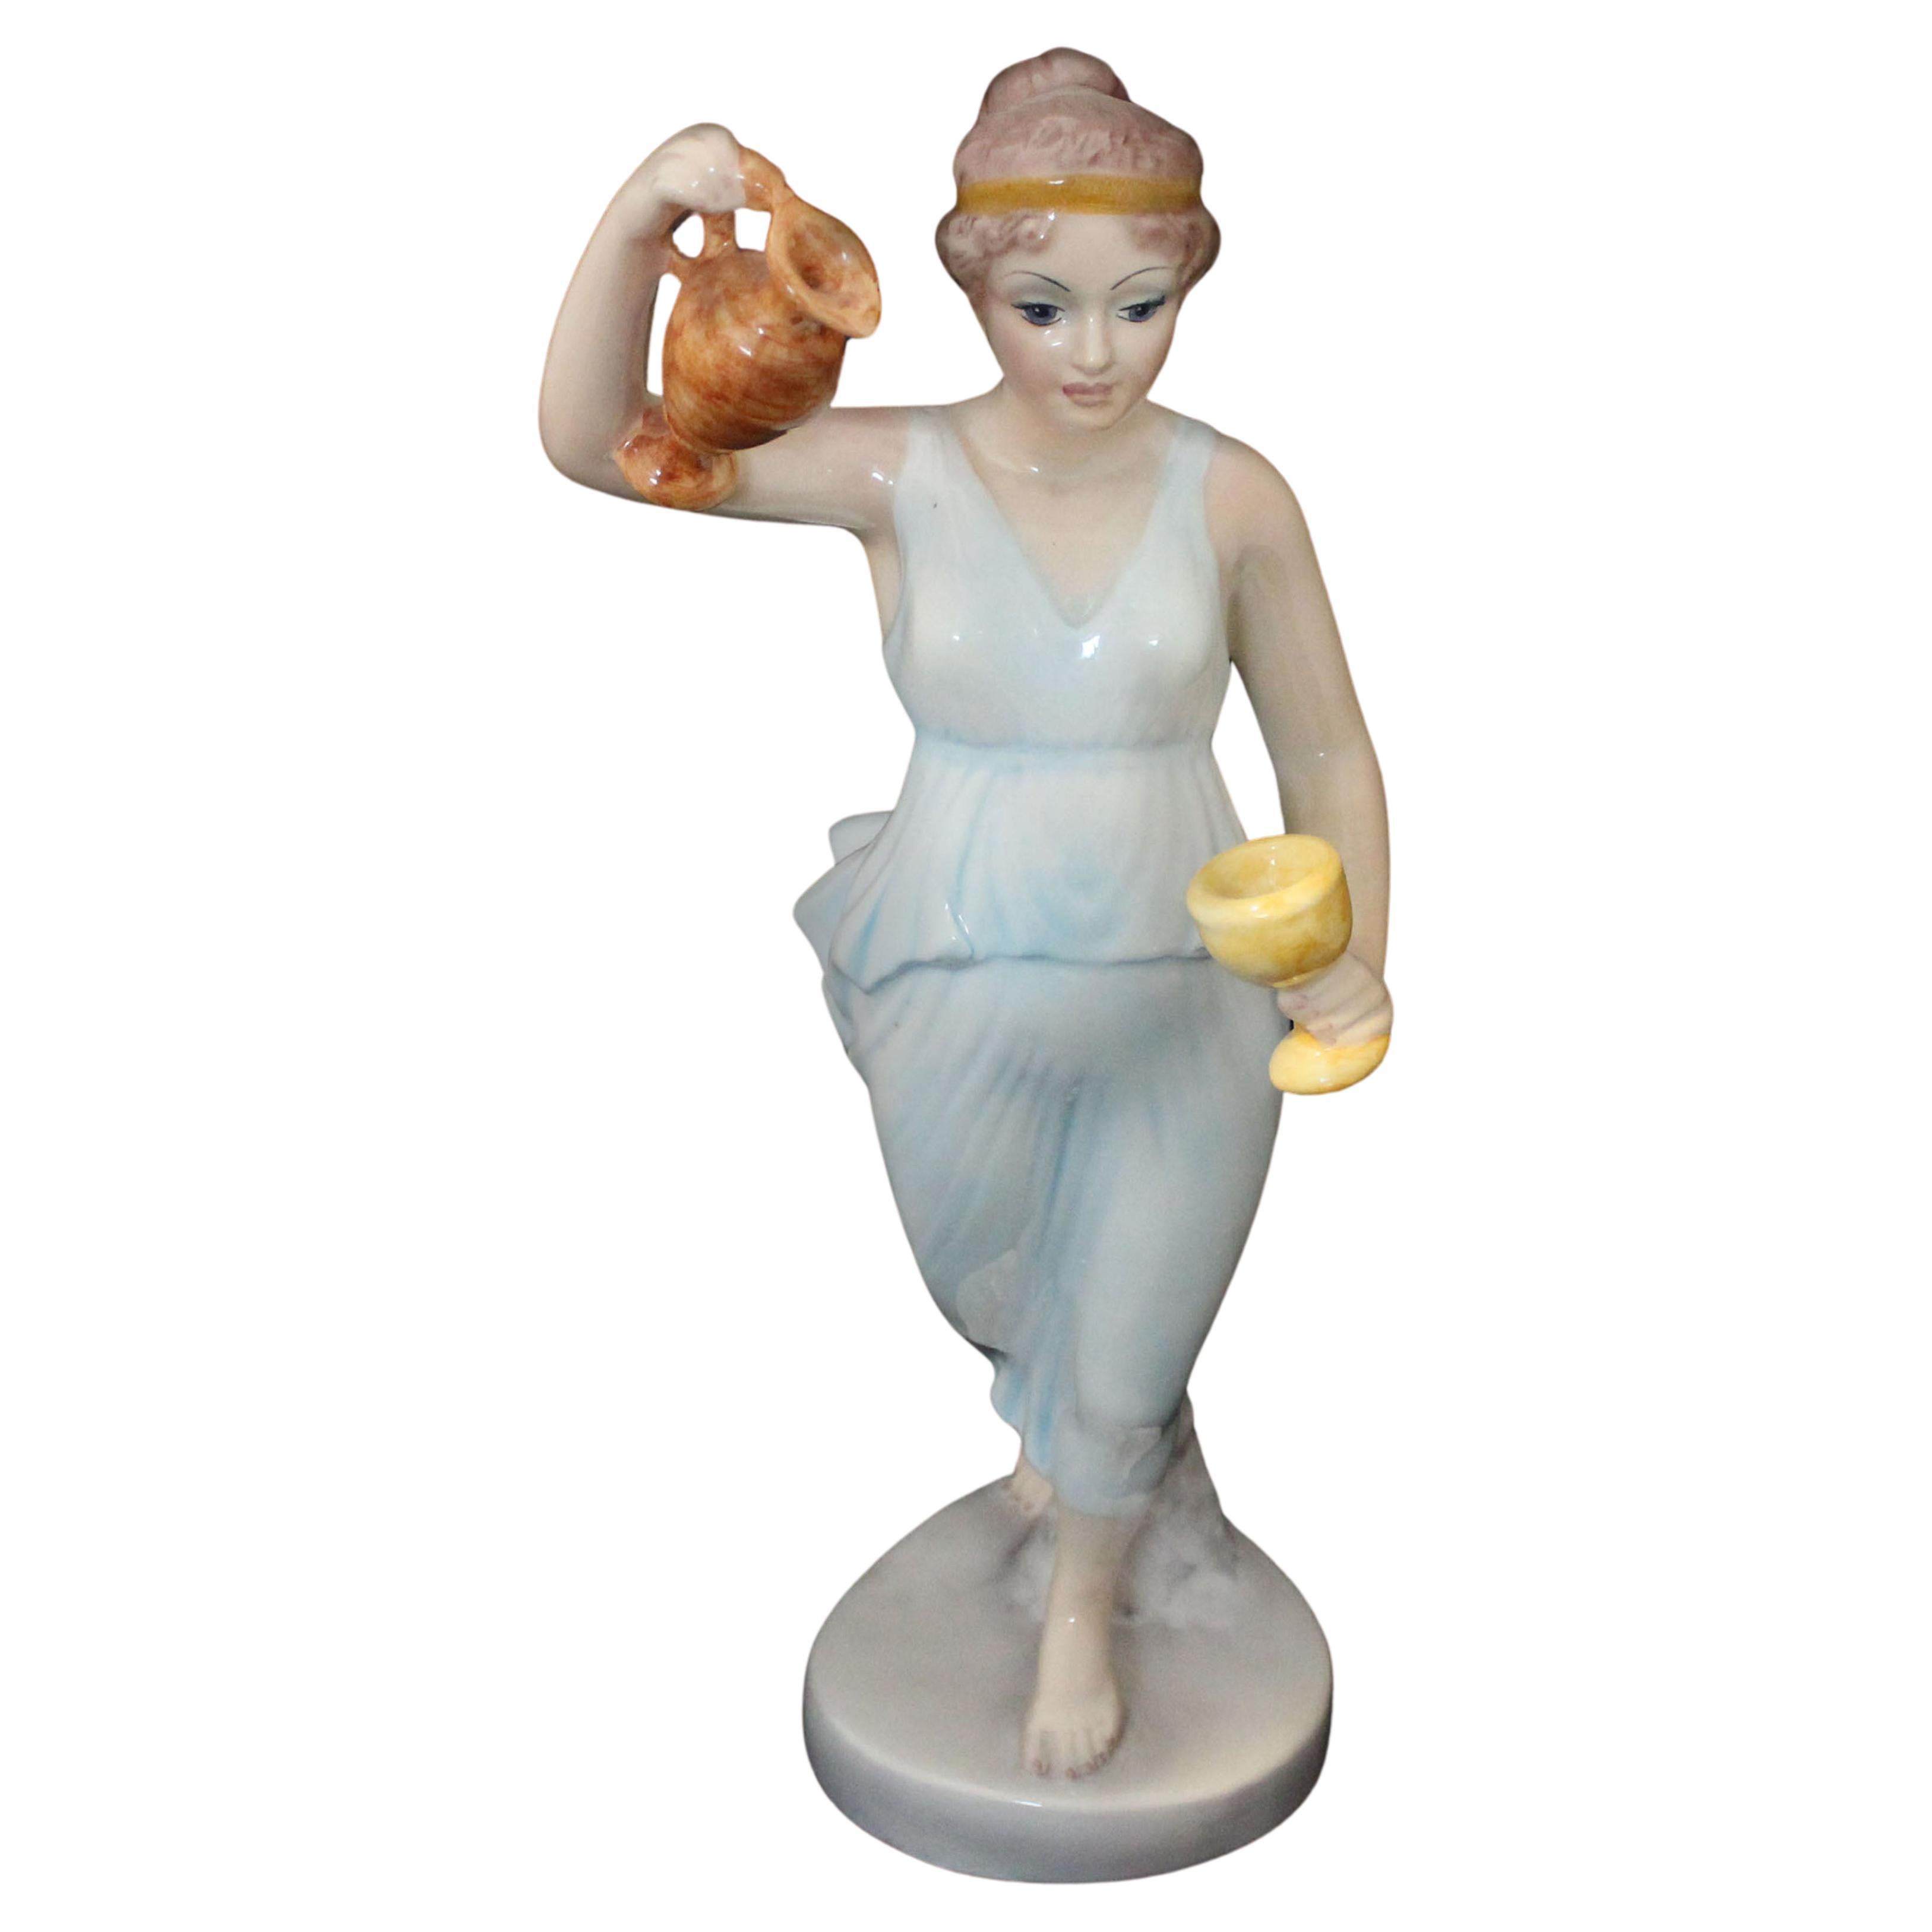 Vestal Ceramic Figure With Jug and Goblet by Giovanni Ronzan for Ronzan, 1940s